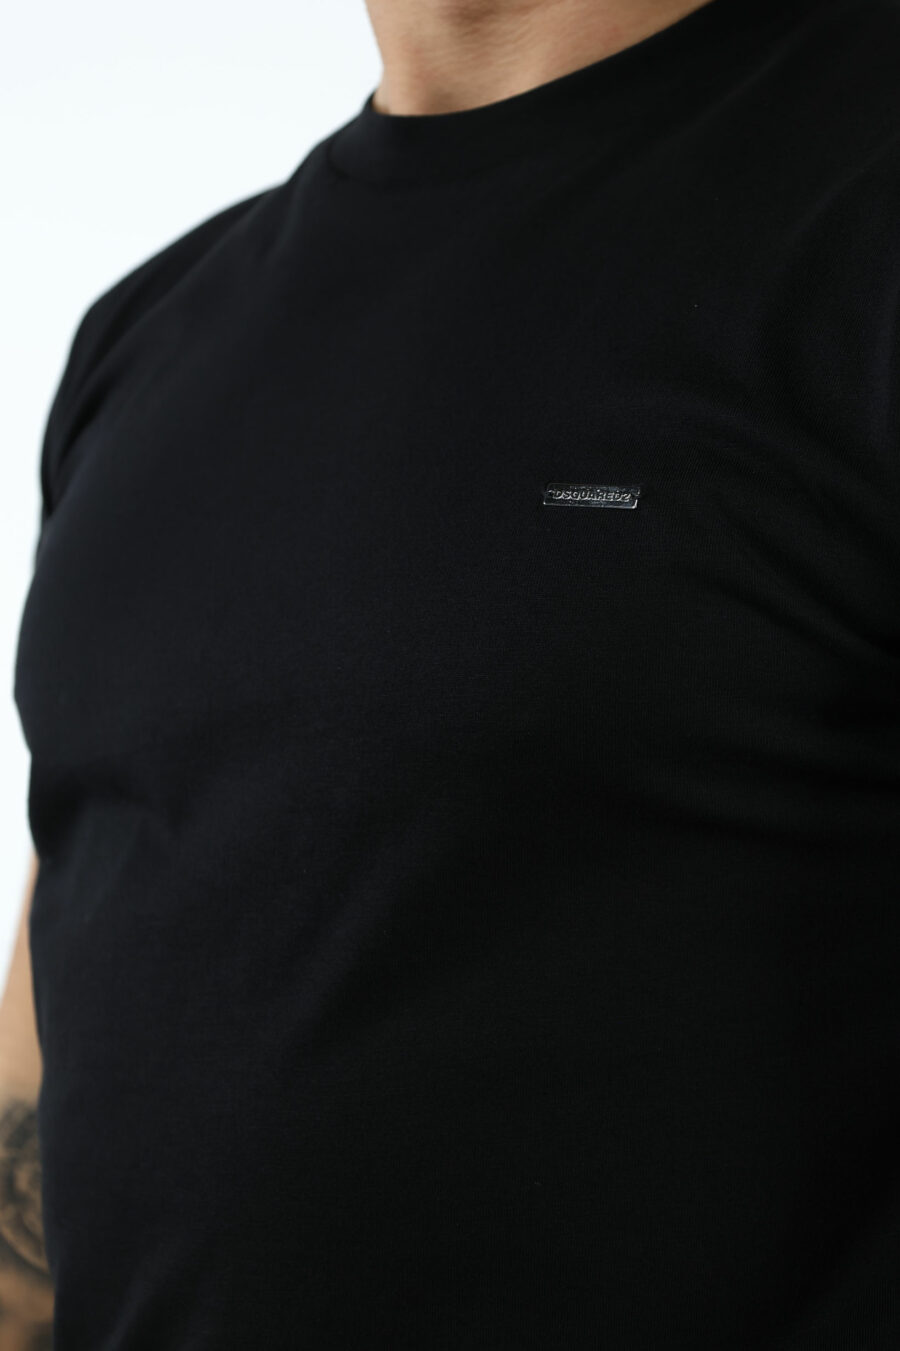 T-shirt black with logo on small badge - 106900